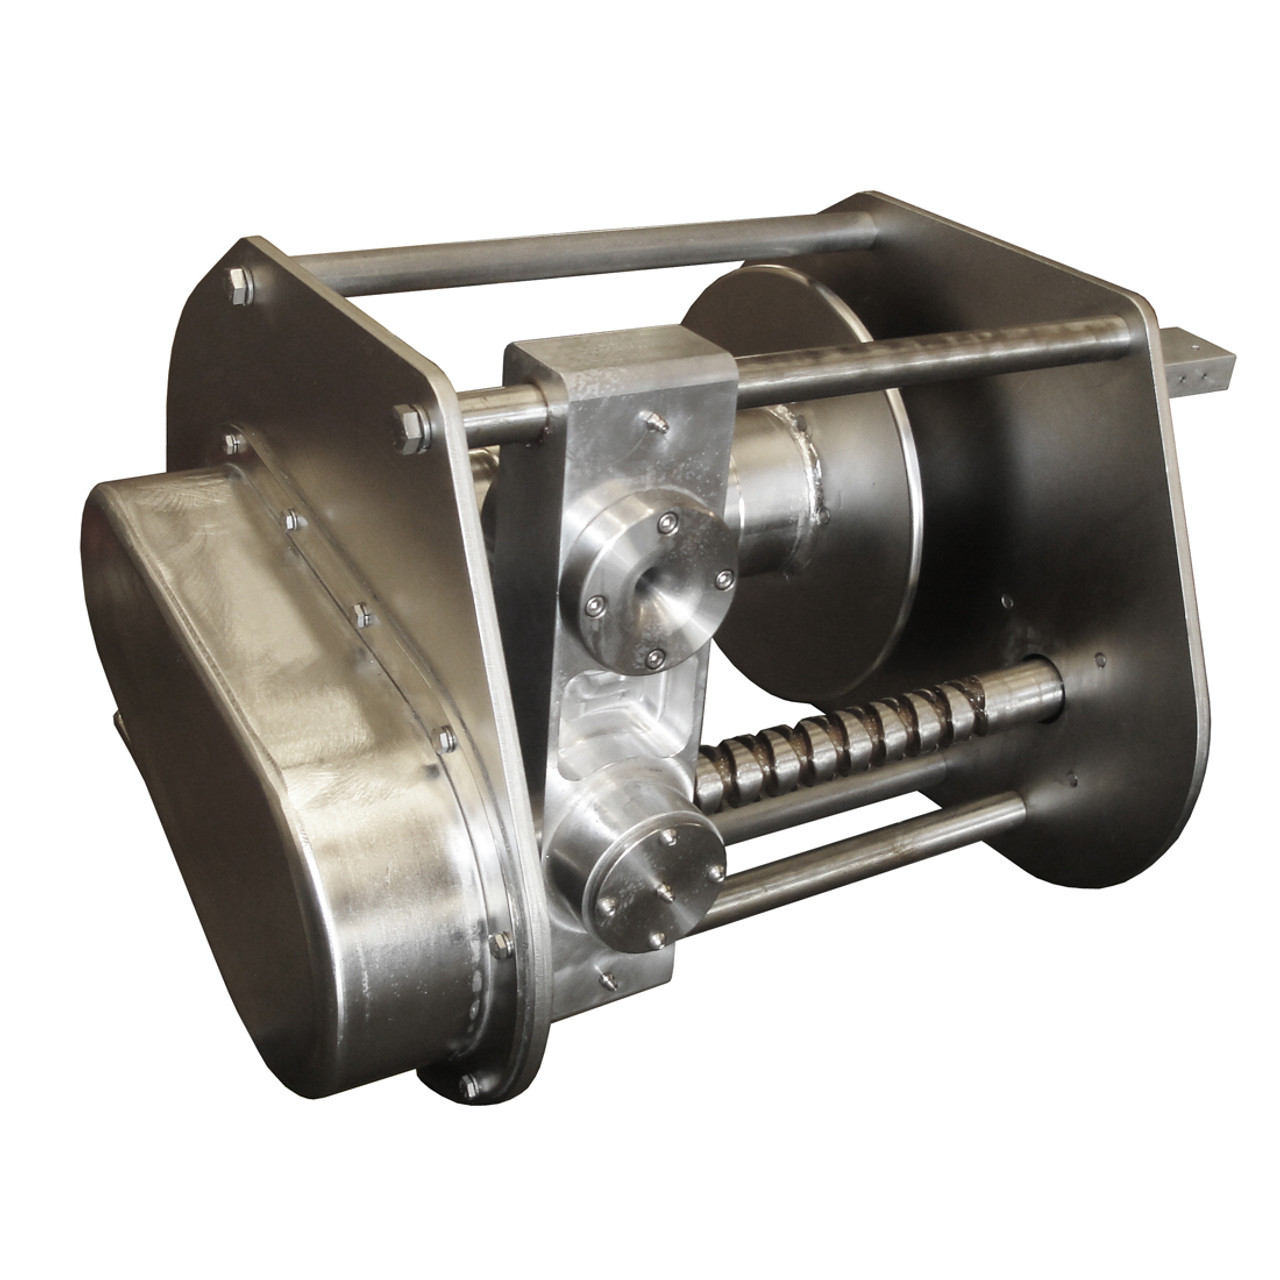 InMac-Kolstrand AKPW12D12W-SS-CAPLW-BRAKE-RE14 Special Stainless Steel Winch with 'Captured' Diamond Screw Level Wind and Hydraulic Brake Assembly